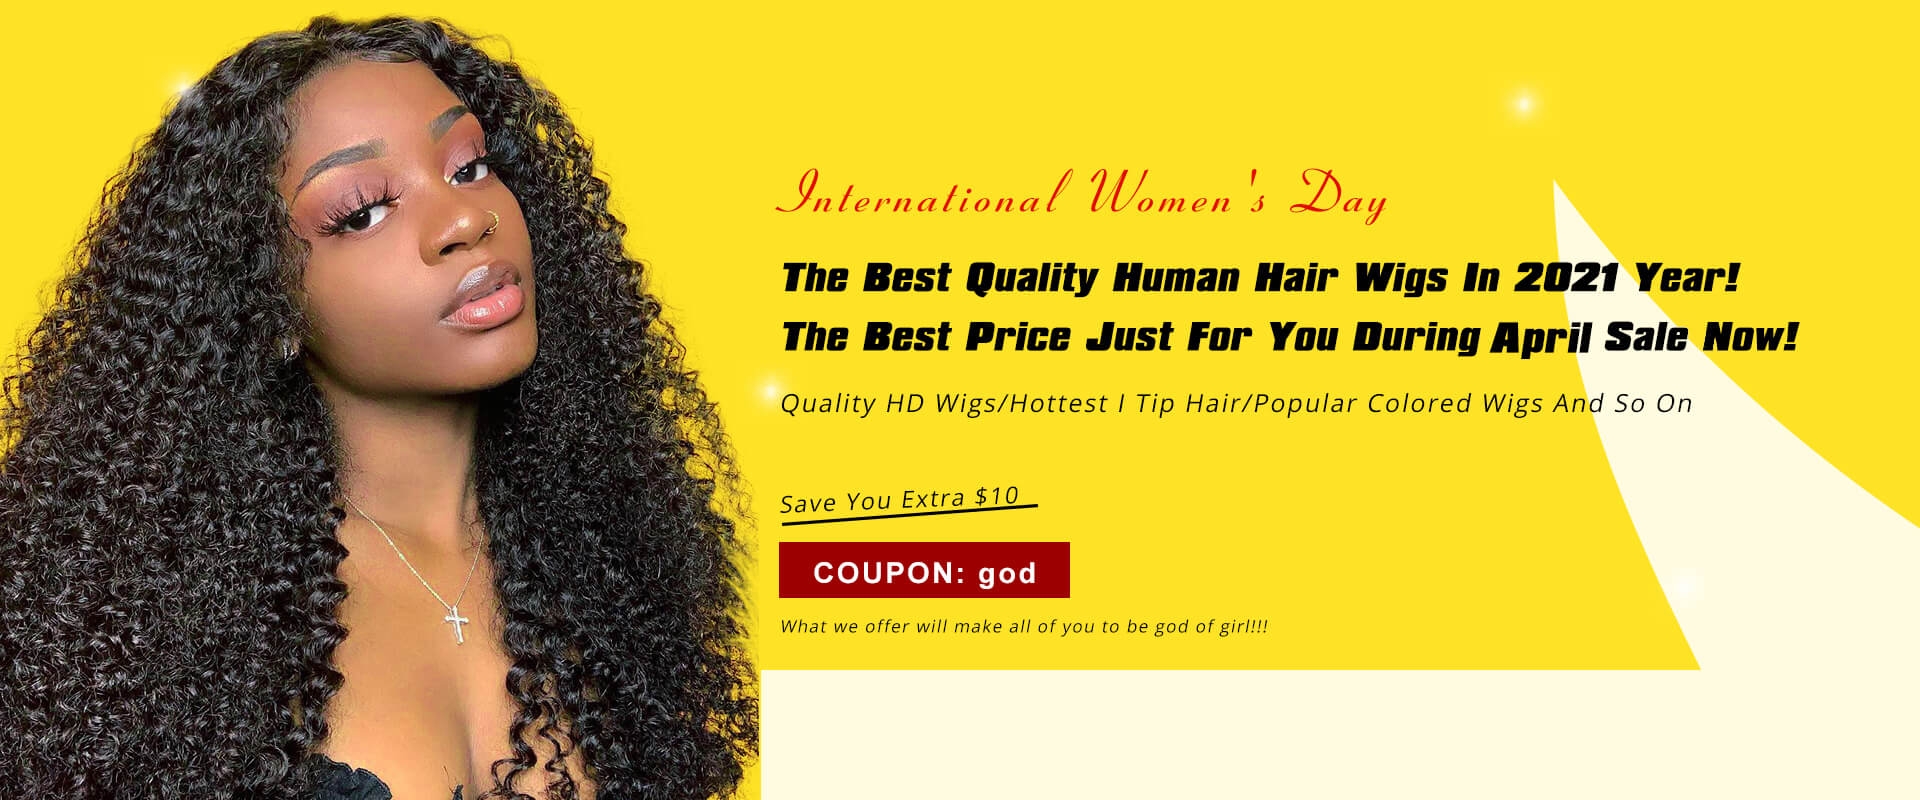 quality human hair wigs for women for sale 